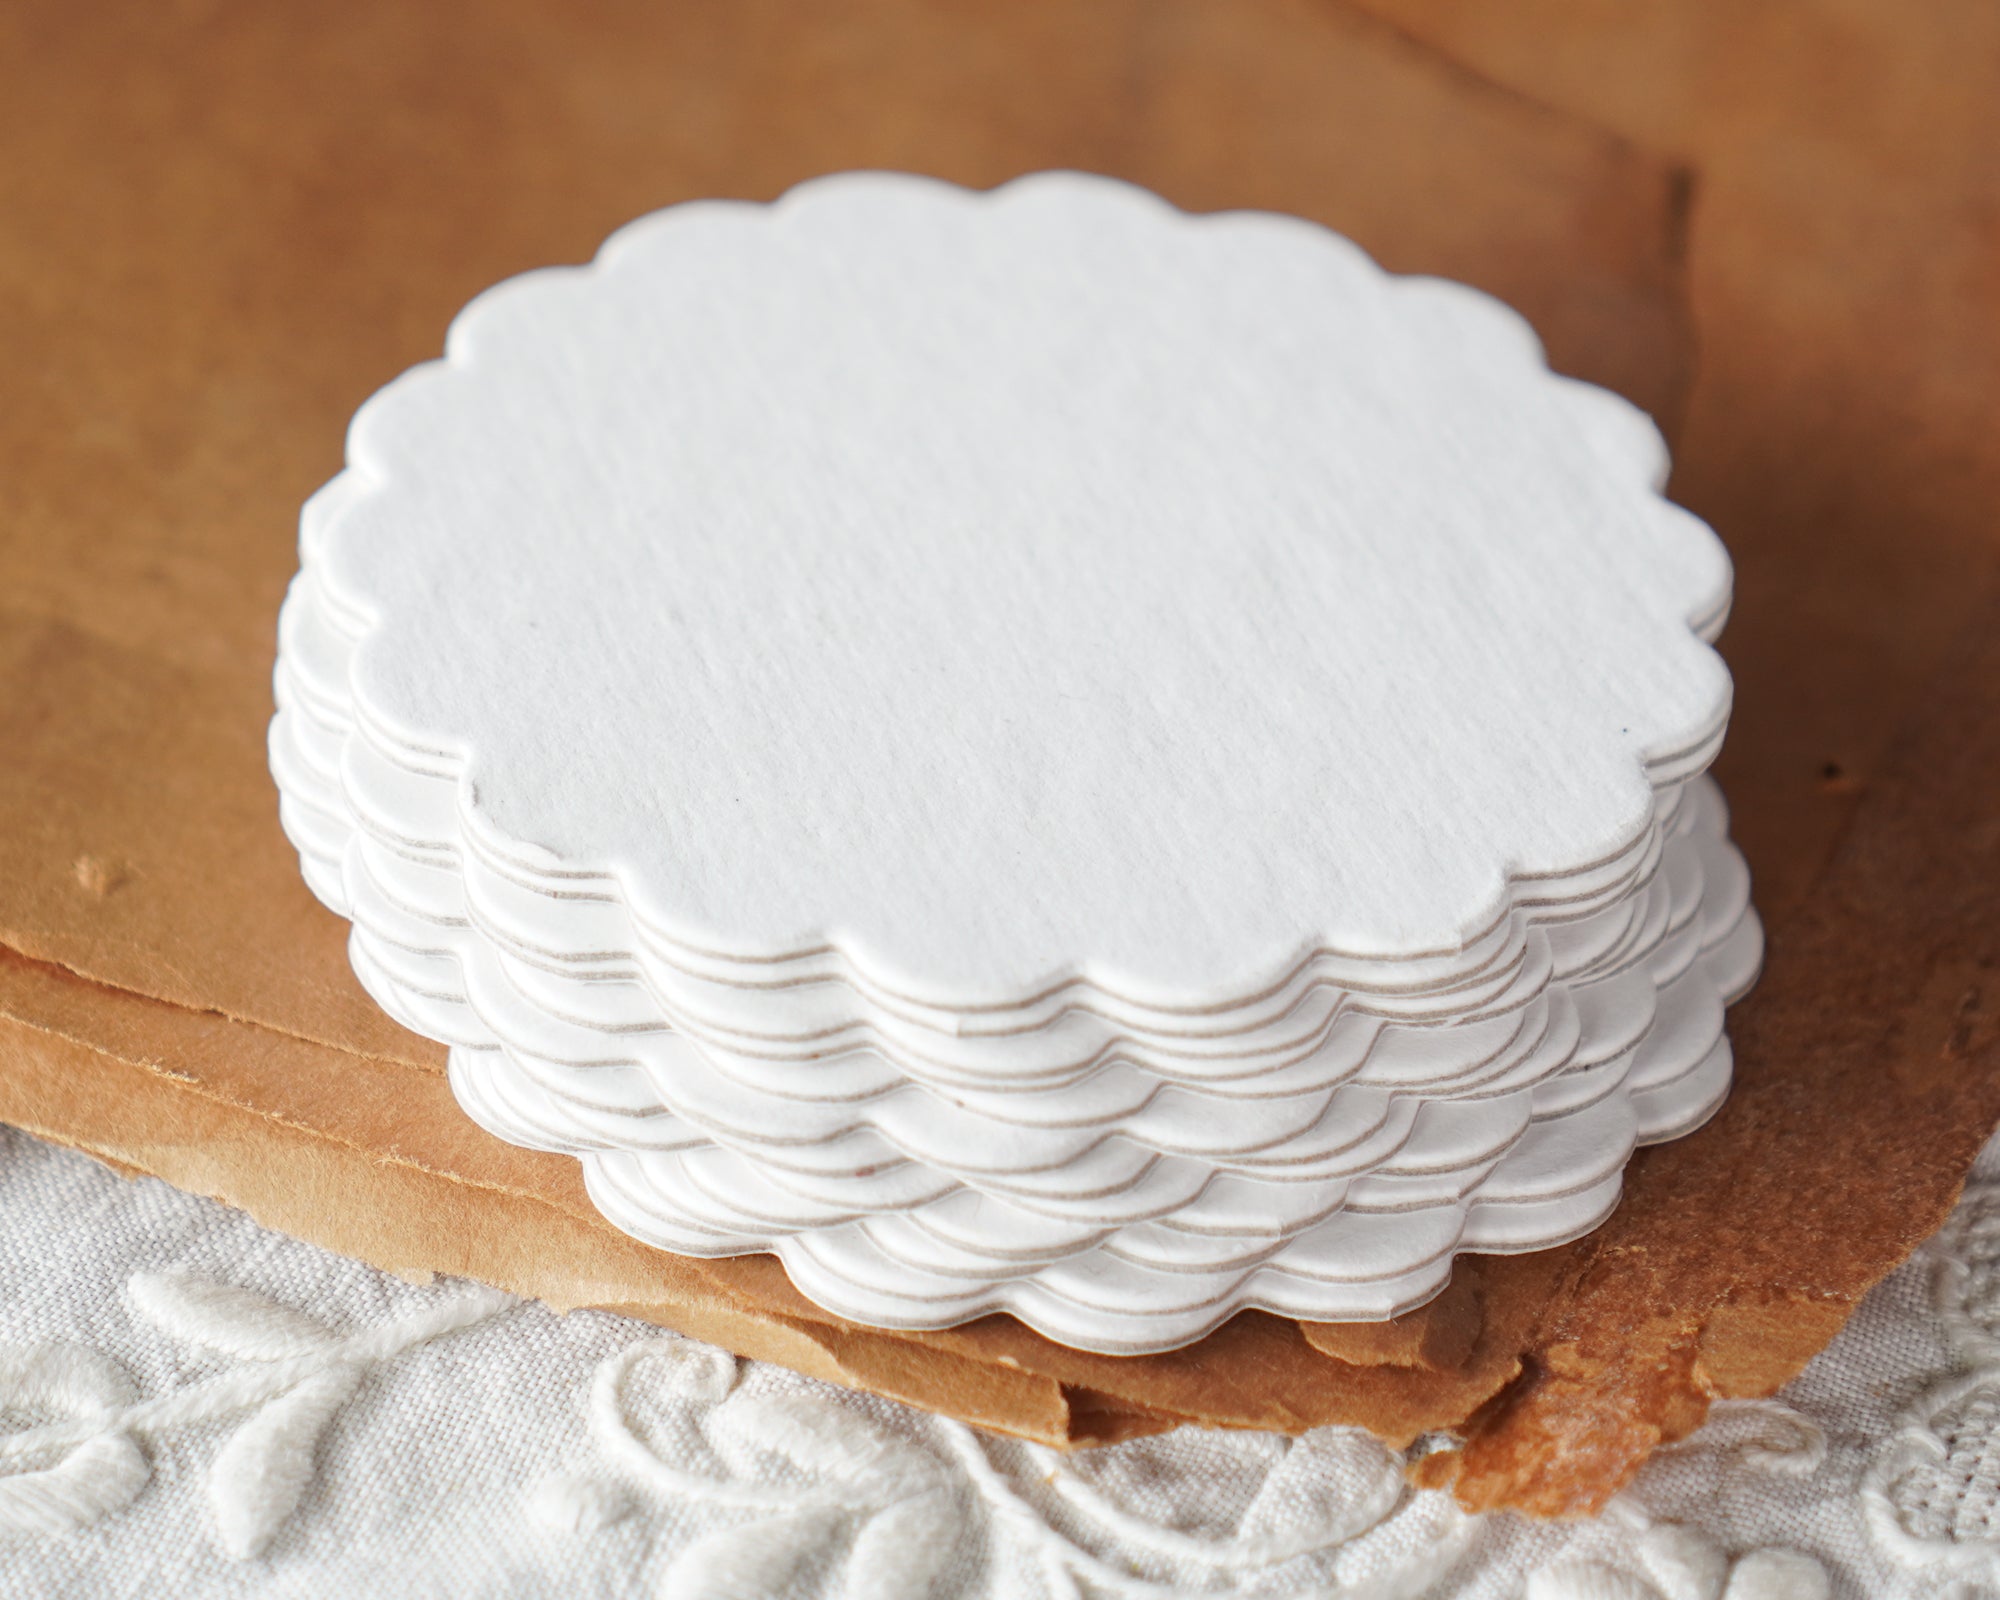 3-Inch Chipboard Craft Circles - Die Cut Scalloped Edge White Cardboard Rounds, 12 Pcs.